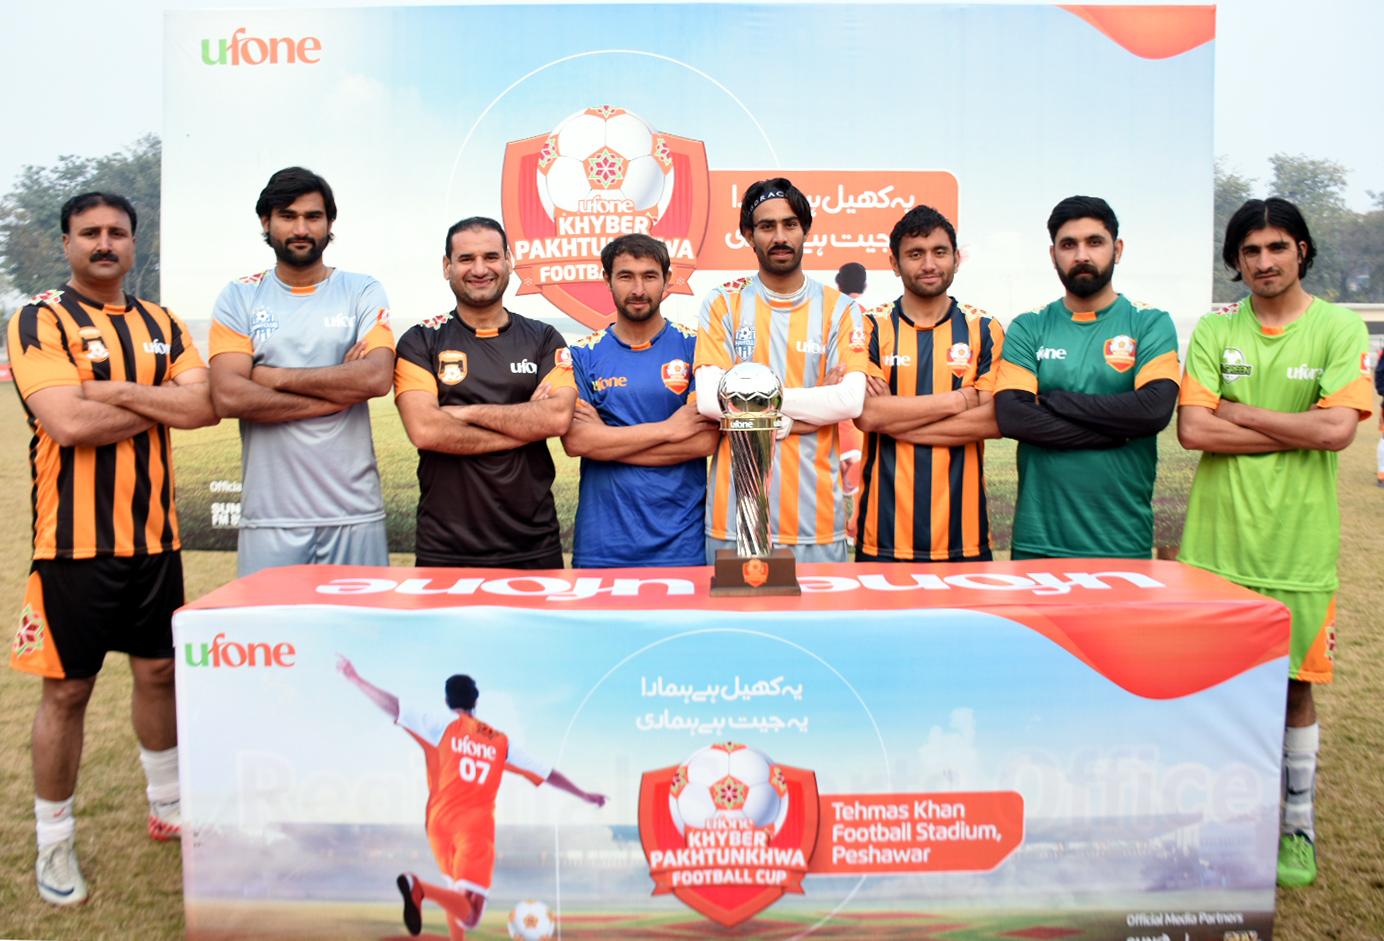 Ufone Khyber Pakhtunkwa Football Cup: Trophy unveiled in Peshawar along with Super8 schedule